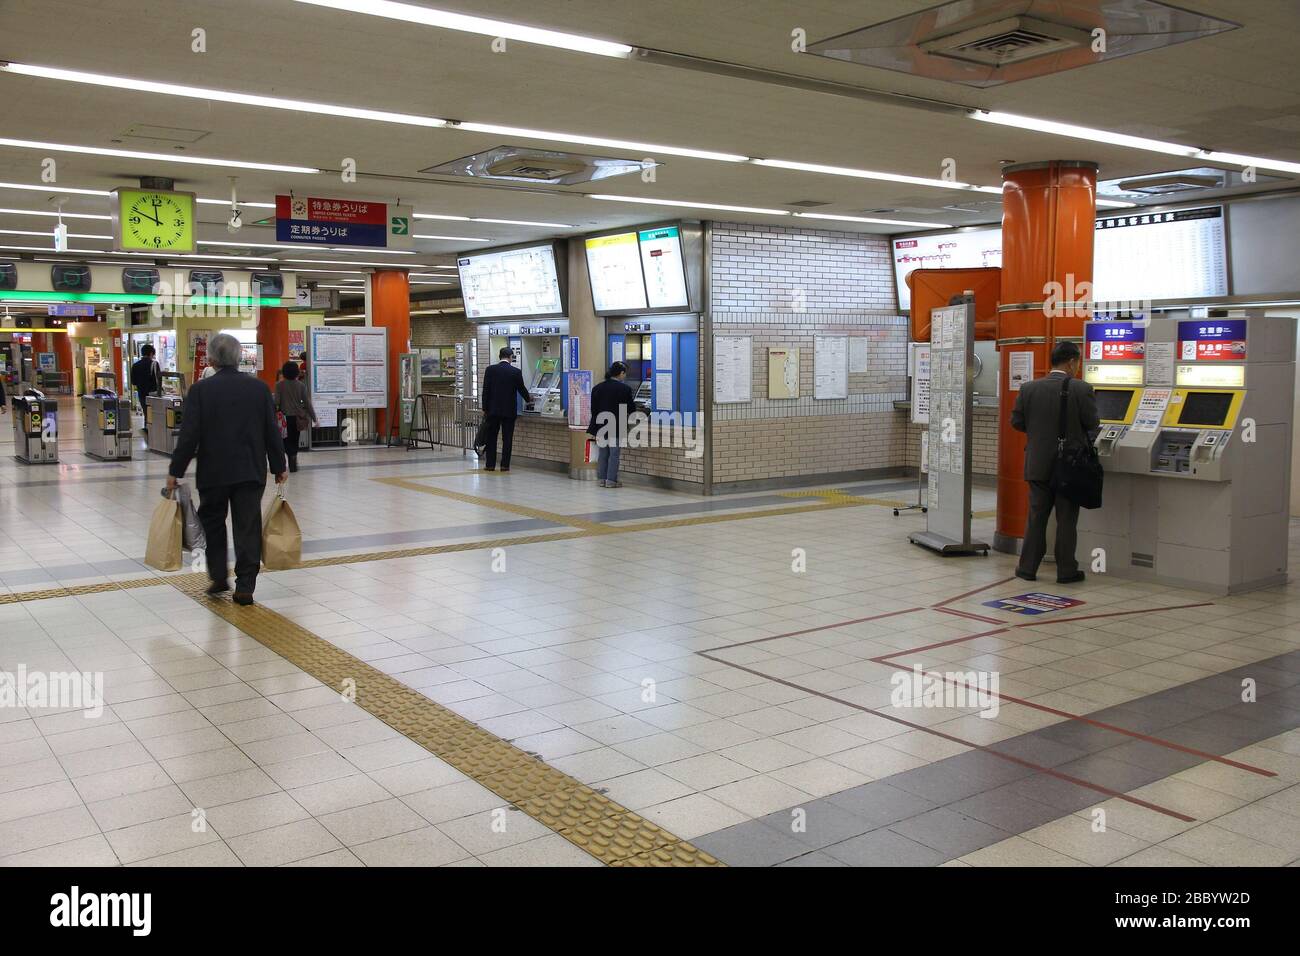 Osaka Japan April 26 12 Passengers Buy Tickets In Osaka Namba Train Station In Osaka Japan Osaka Namba Exists Since 1970 And Was Used By Aver Stock Photo Alamy